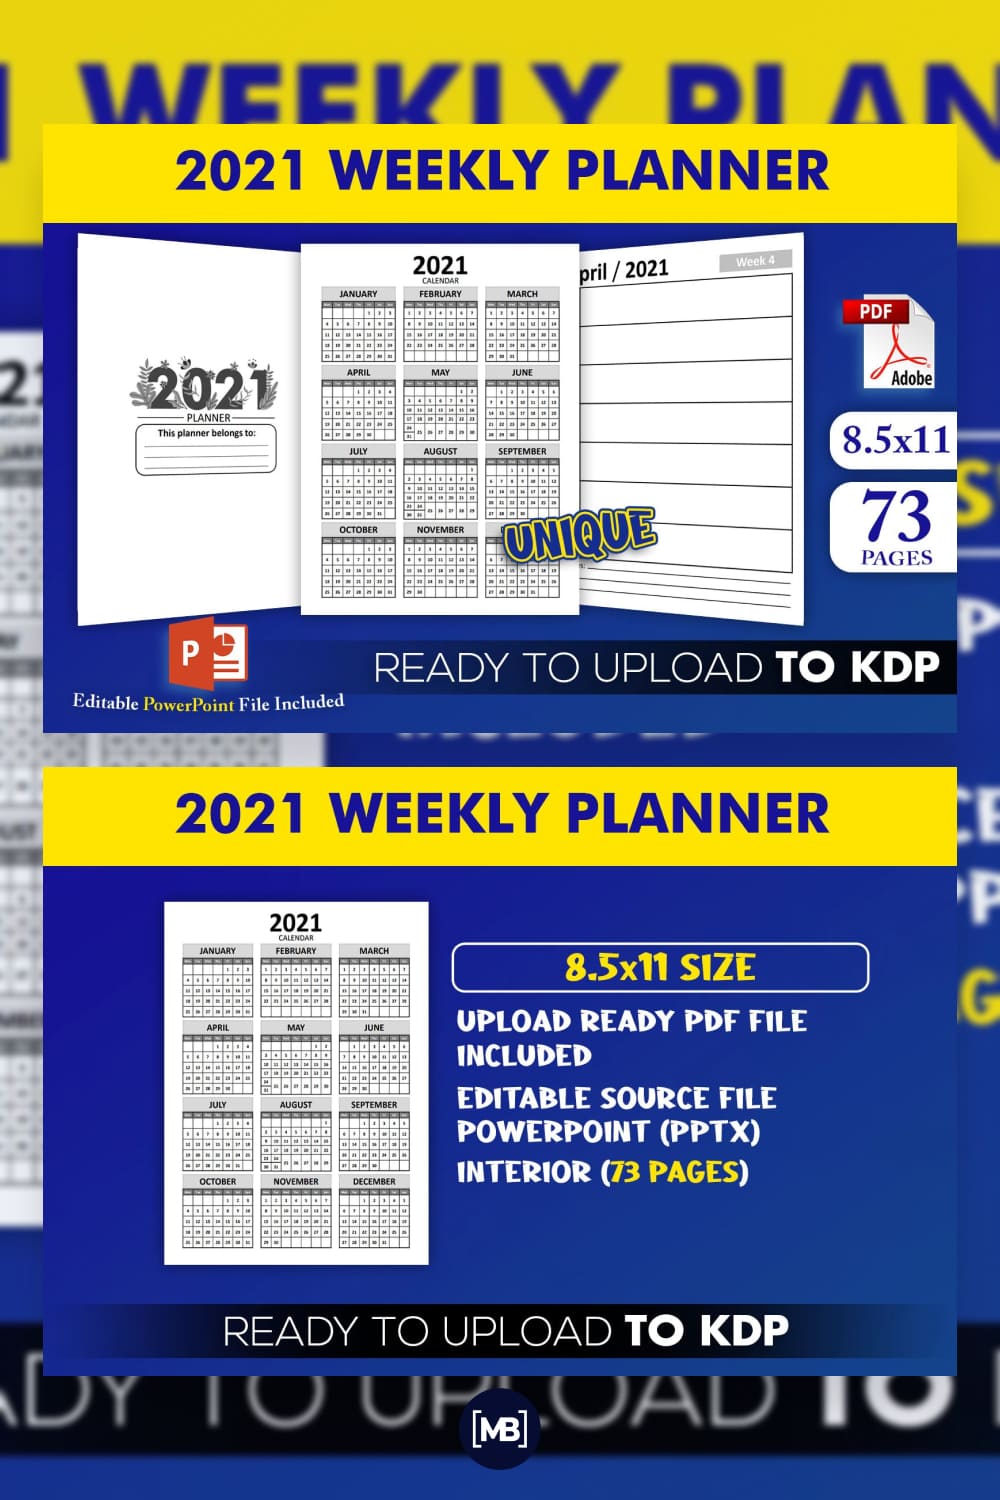 One year 2021 weekly planner editable template.